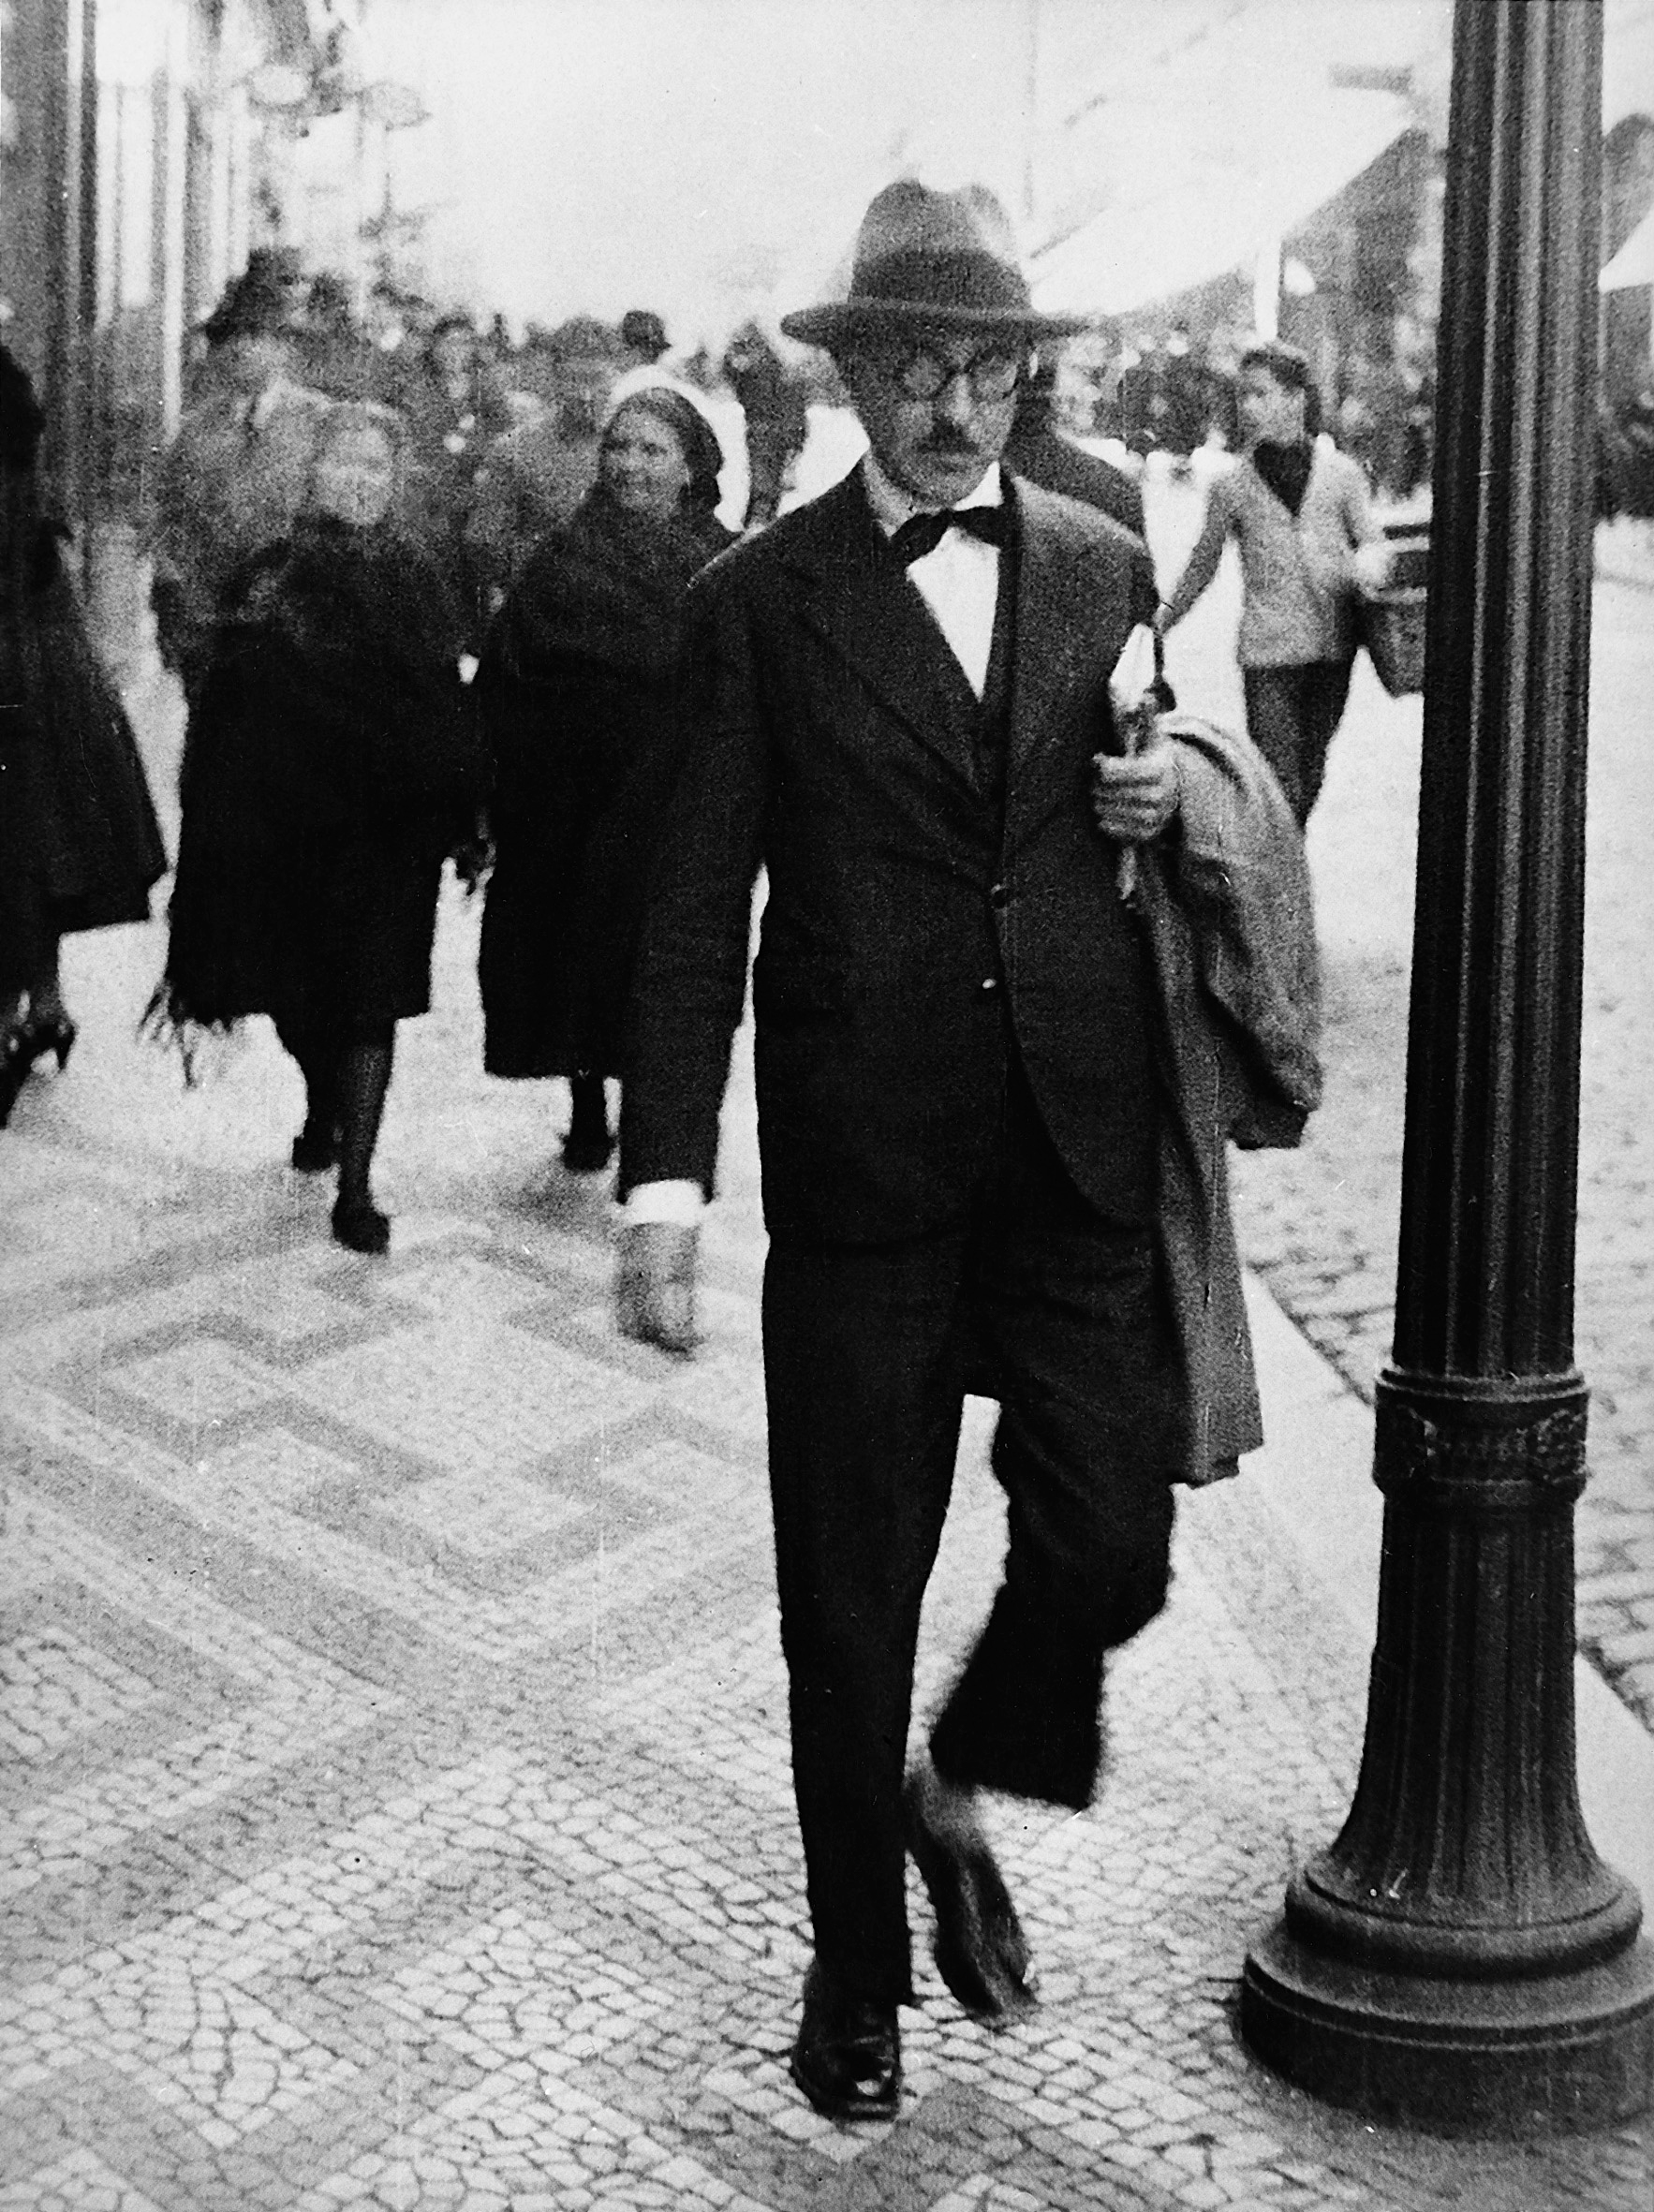 black-and-white photo of portuguese author Fernando Pessoa walking through a street in Lisbon, 1920s or 1930s, with other passersby in the background